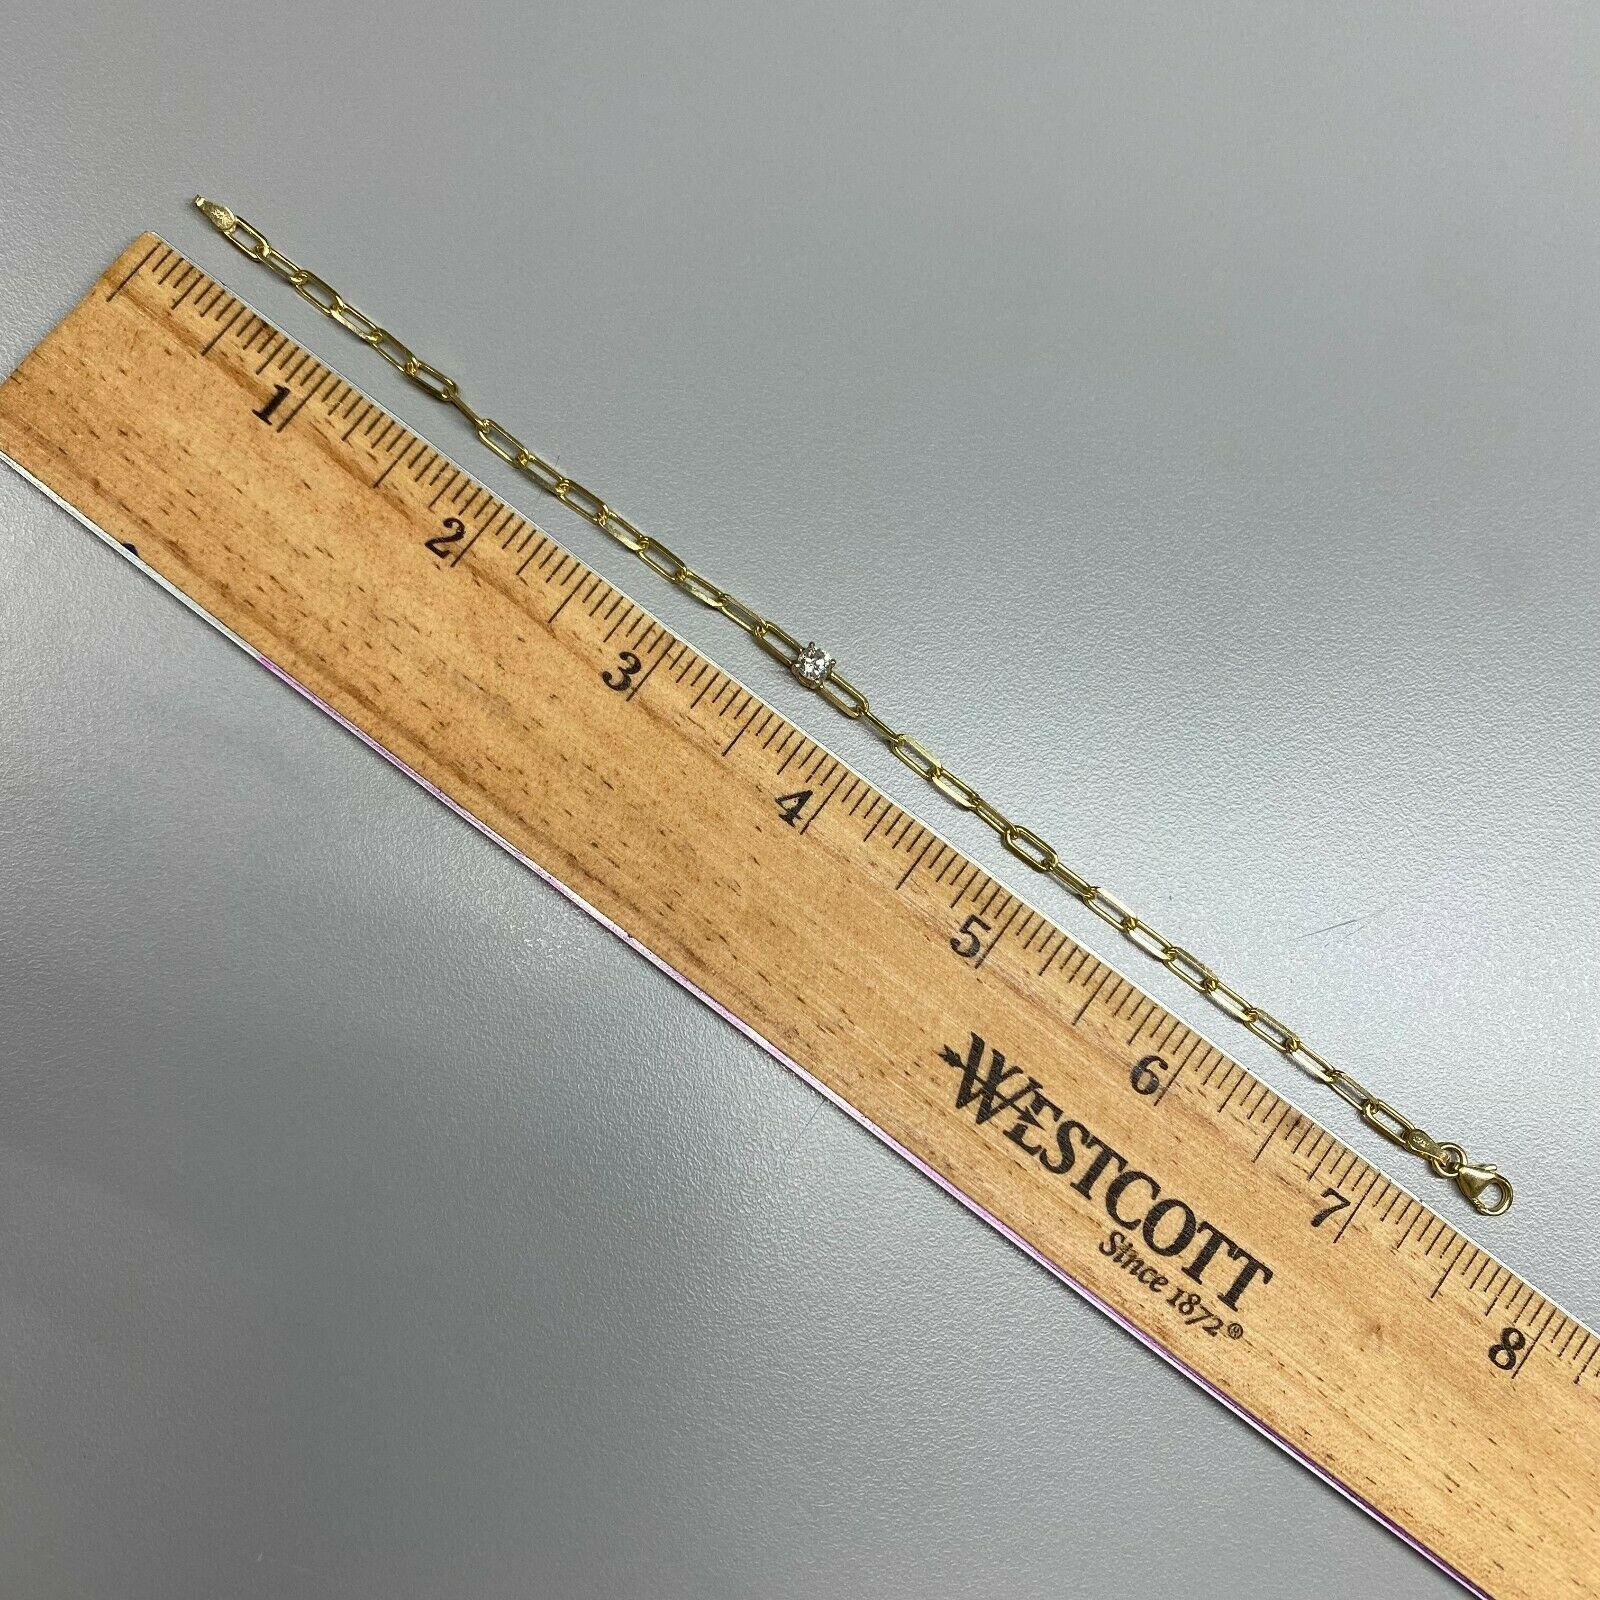 5.45 inches on a ruler